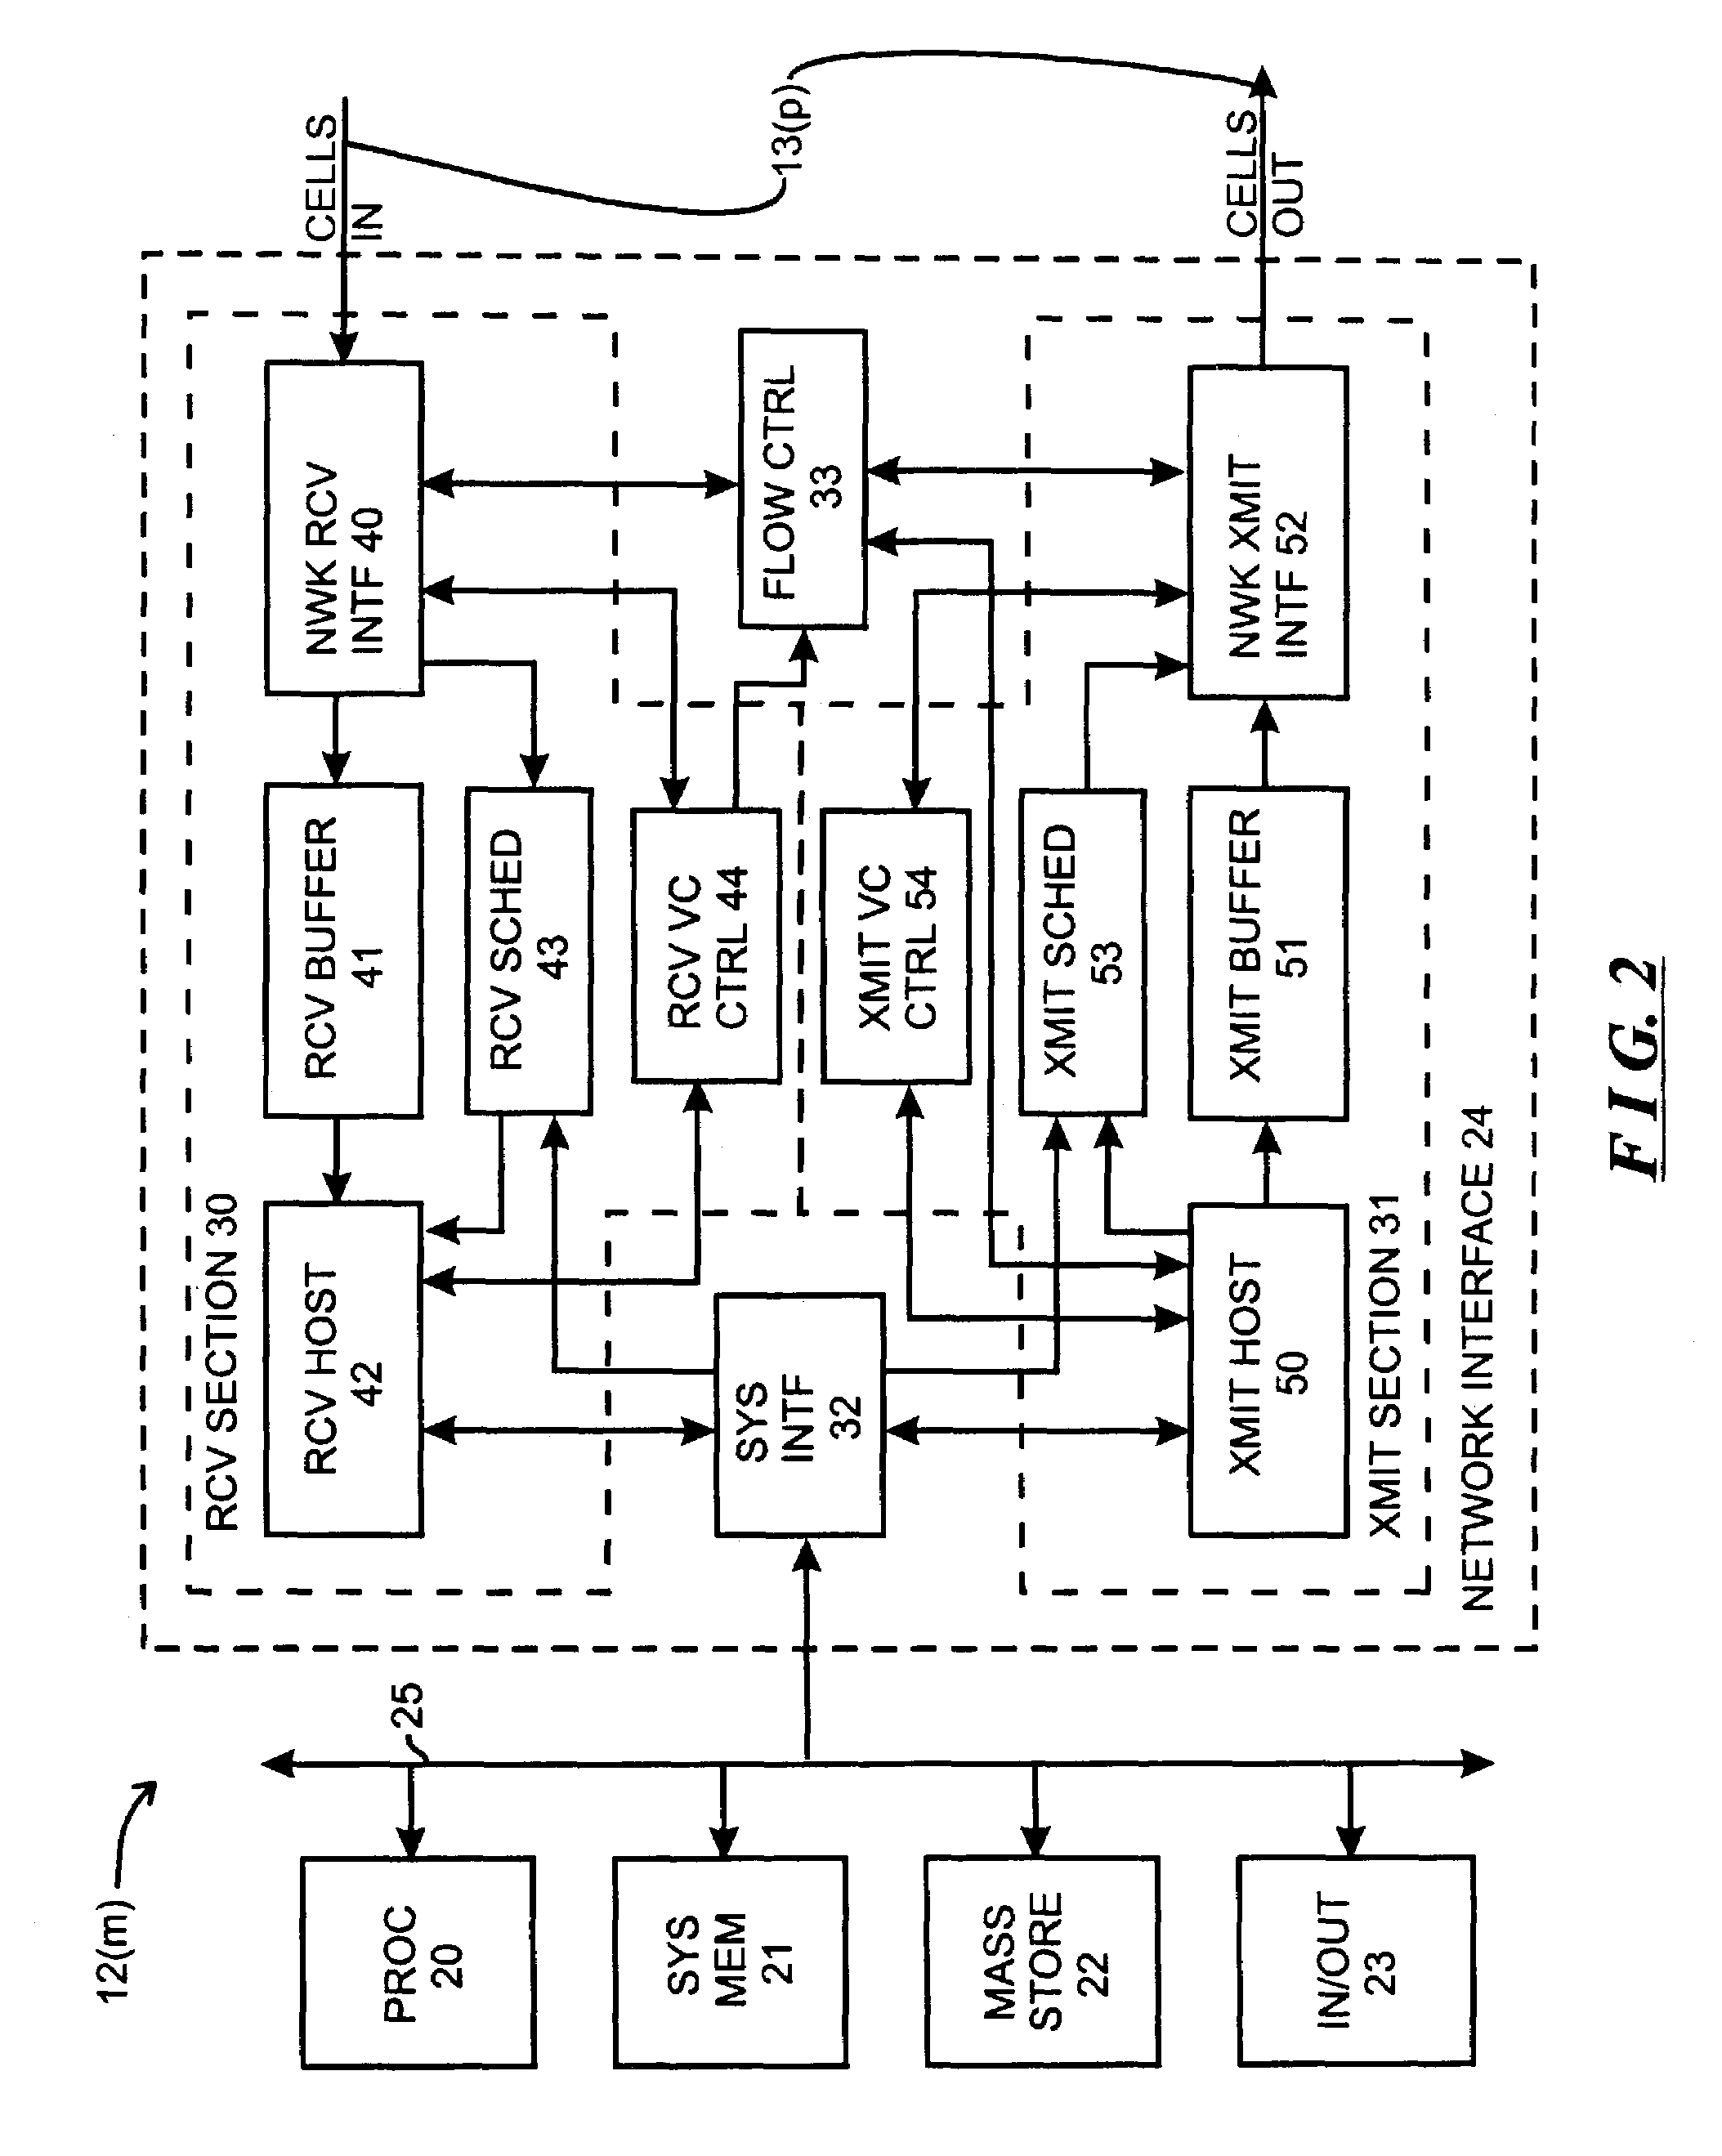 System and method for regulating message flow in a digital data network